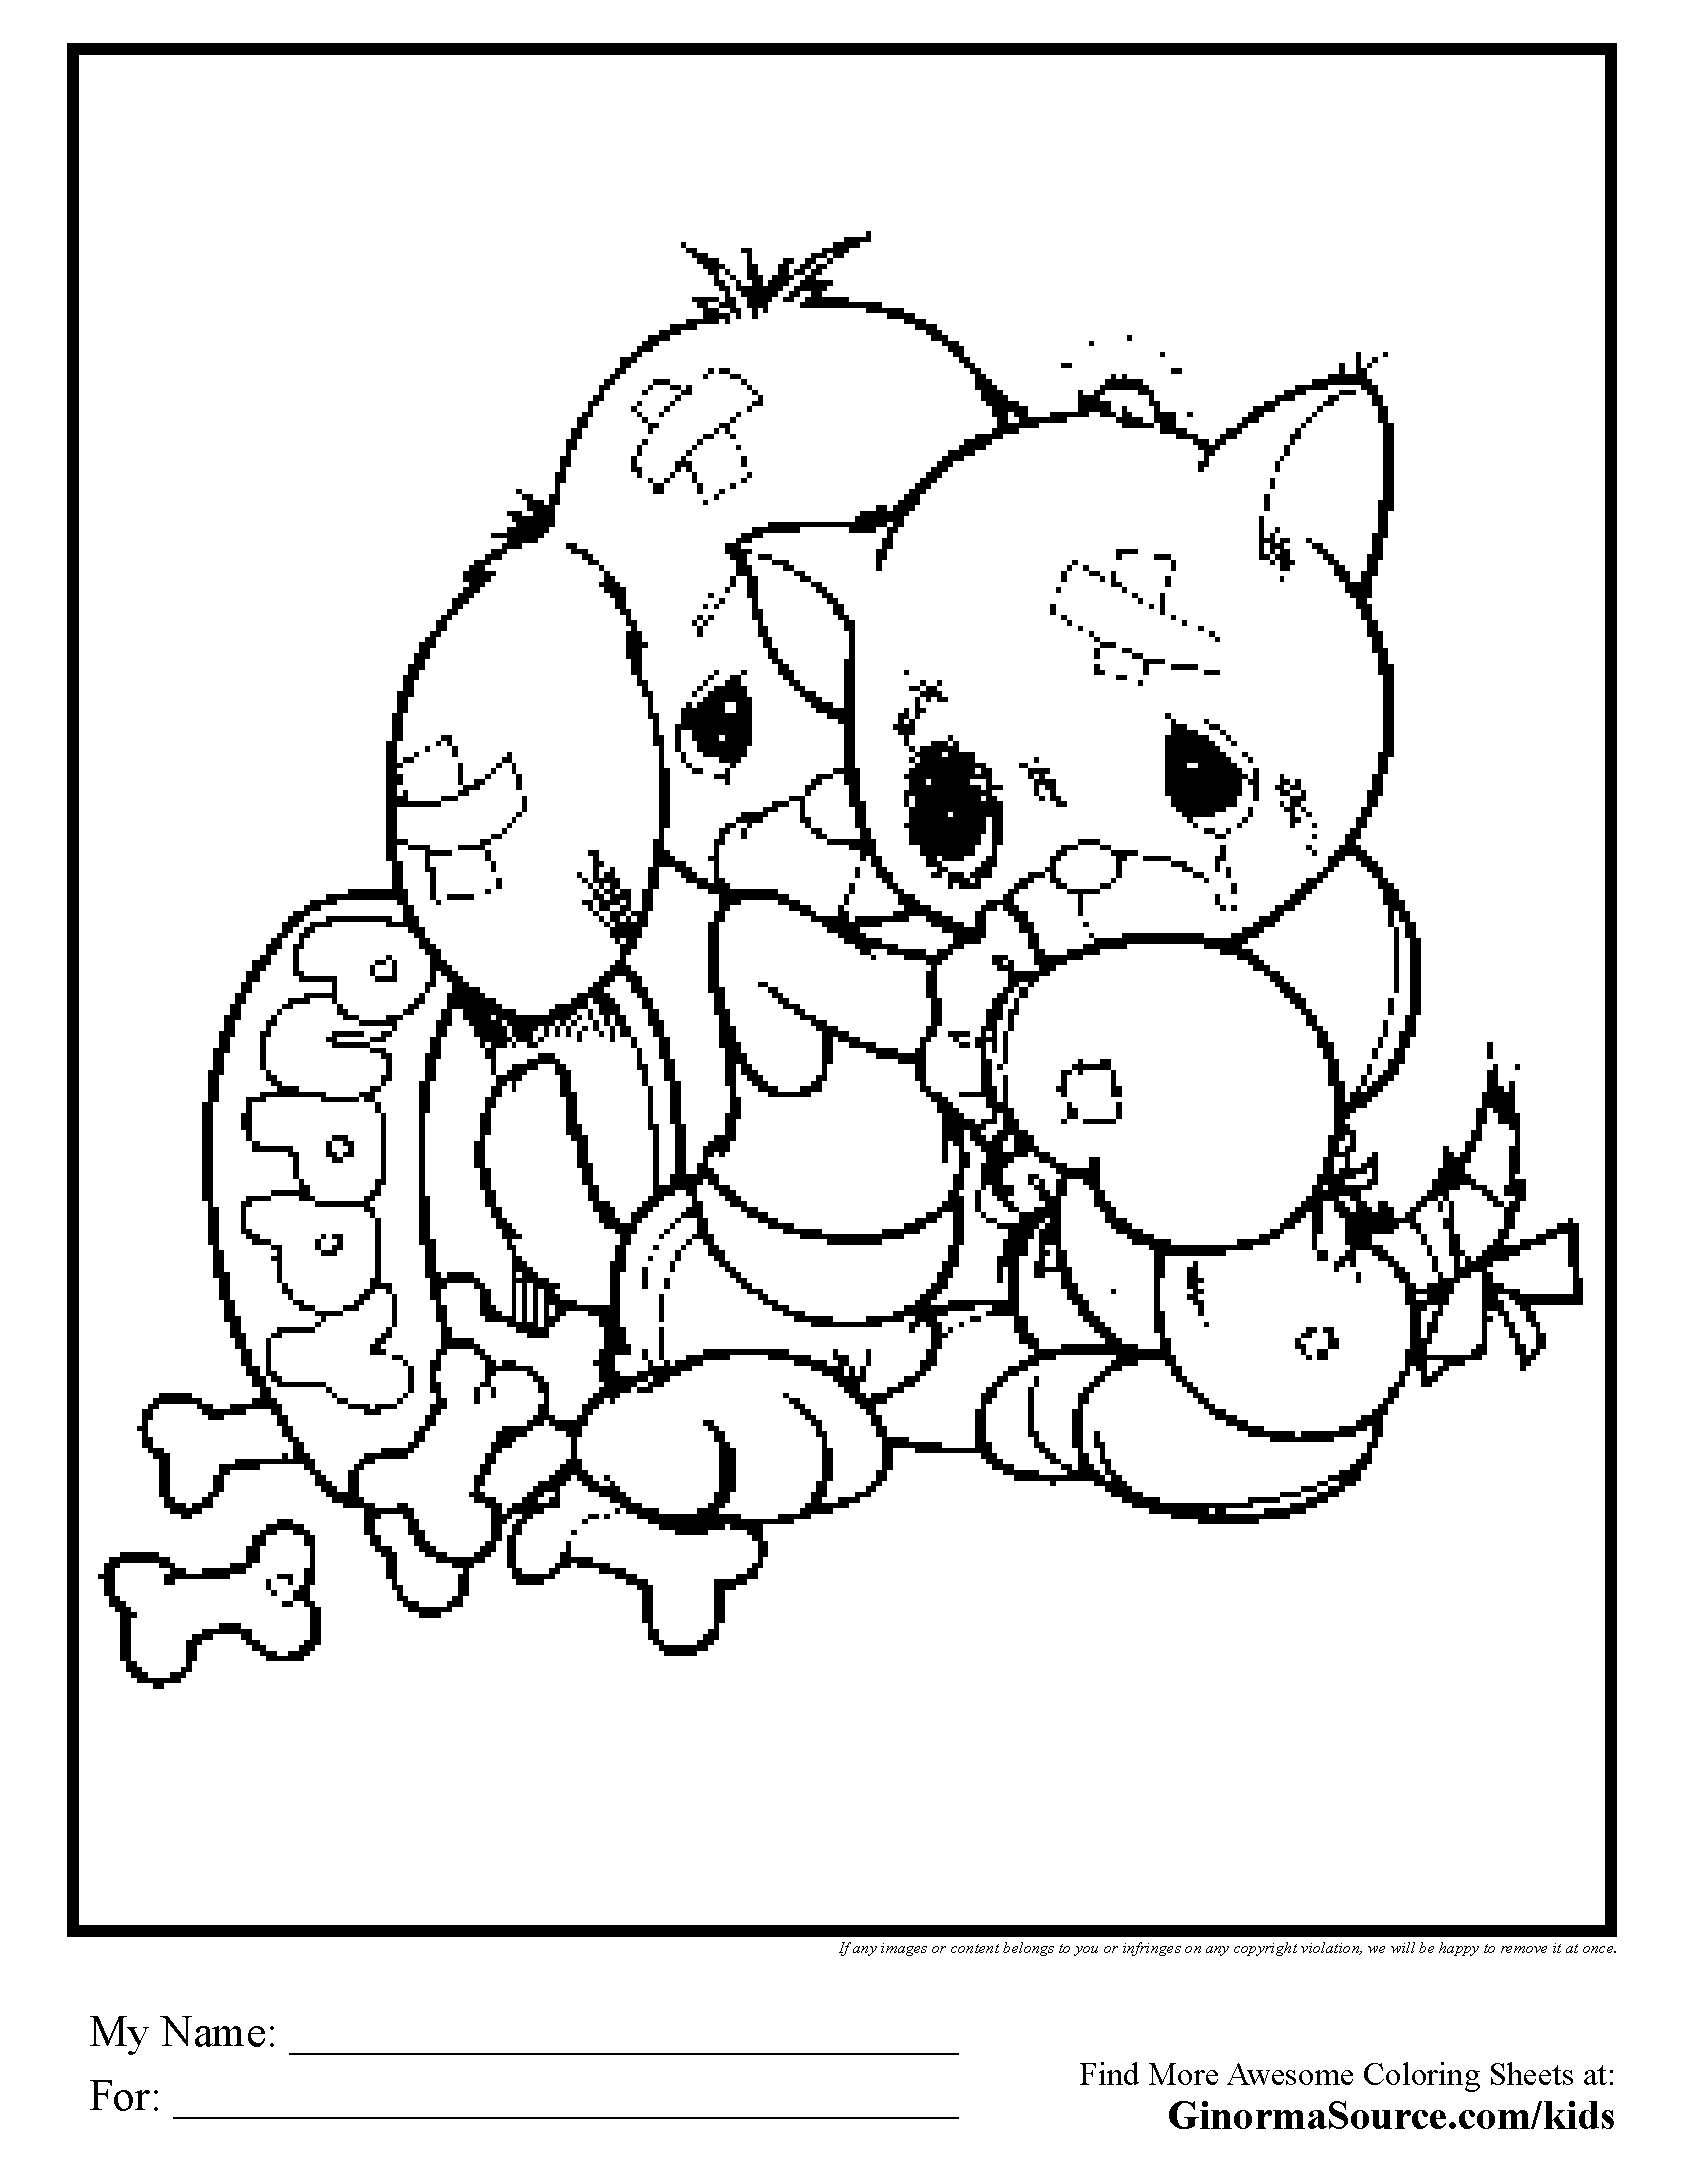 puppy and kitten coloring pages | www.pavingmaze.com